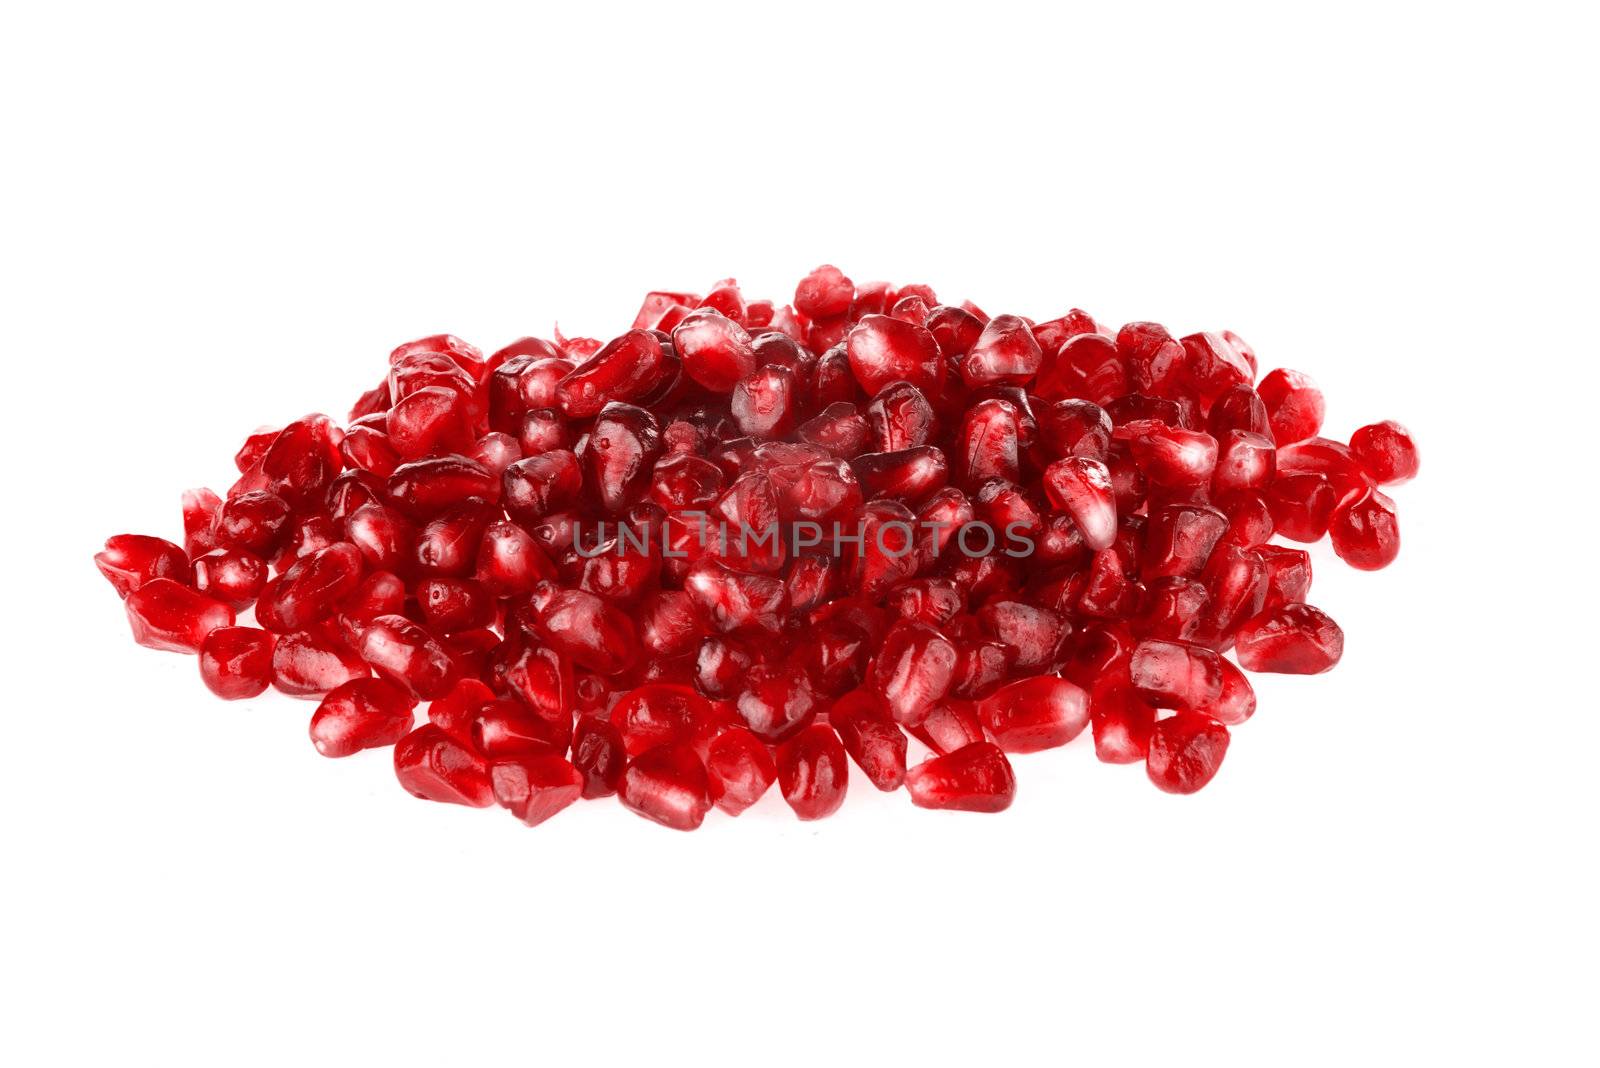 Pomegranate seeds by BDS